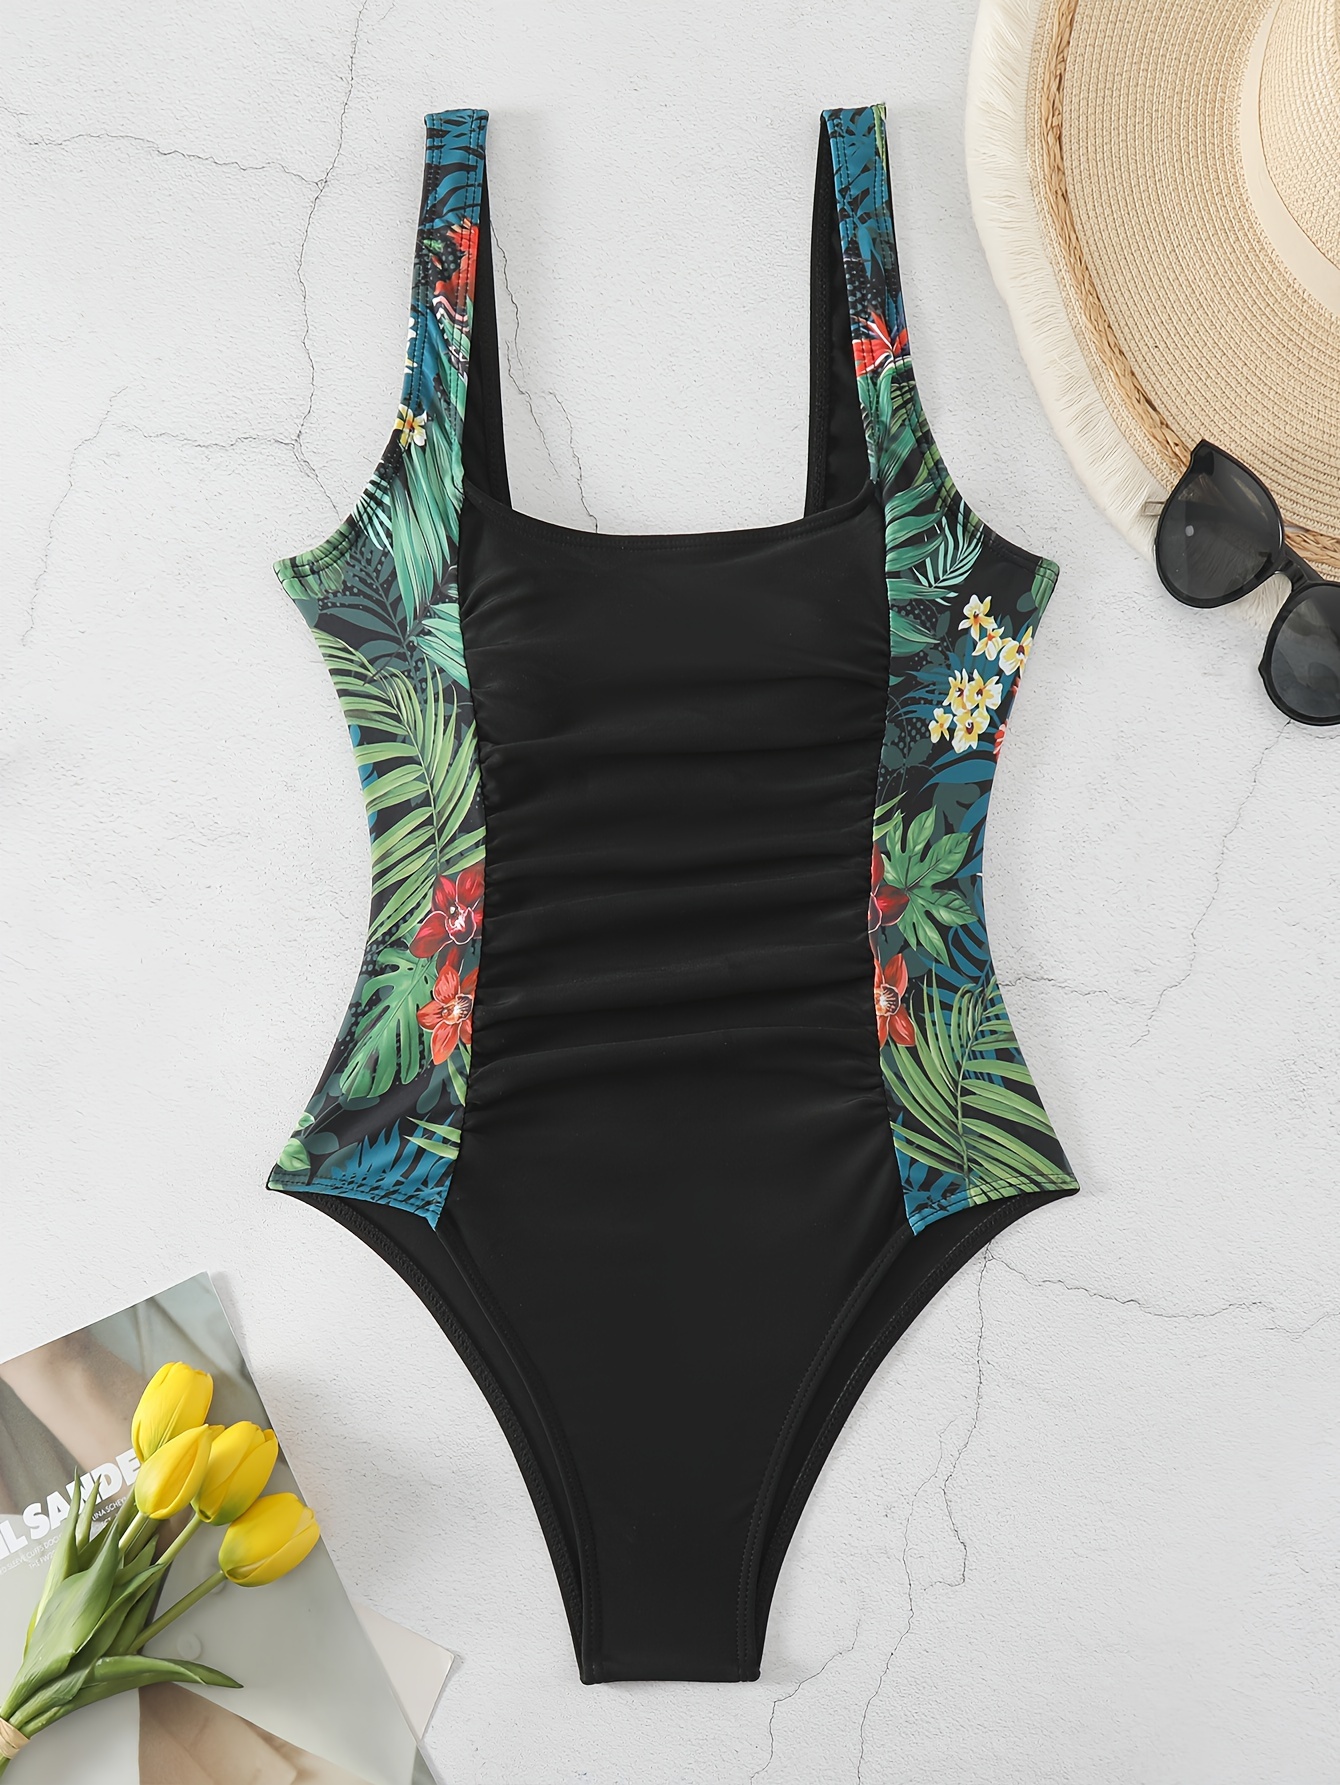 Dropship Short Sleeve Tropical Floral Print Zipper Swimsuit, Crew Neck  Patchwork Medium Strech One Piece Bodysuit For Beach Sport Bathing Surfing,  Women's Swimwear & Clothing to Sell Online at a Lower Price